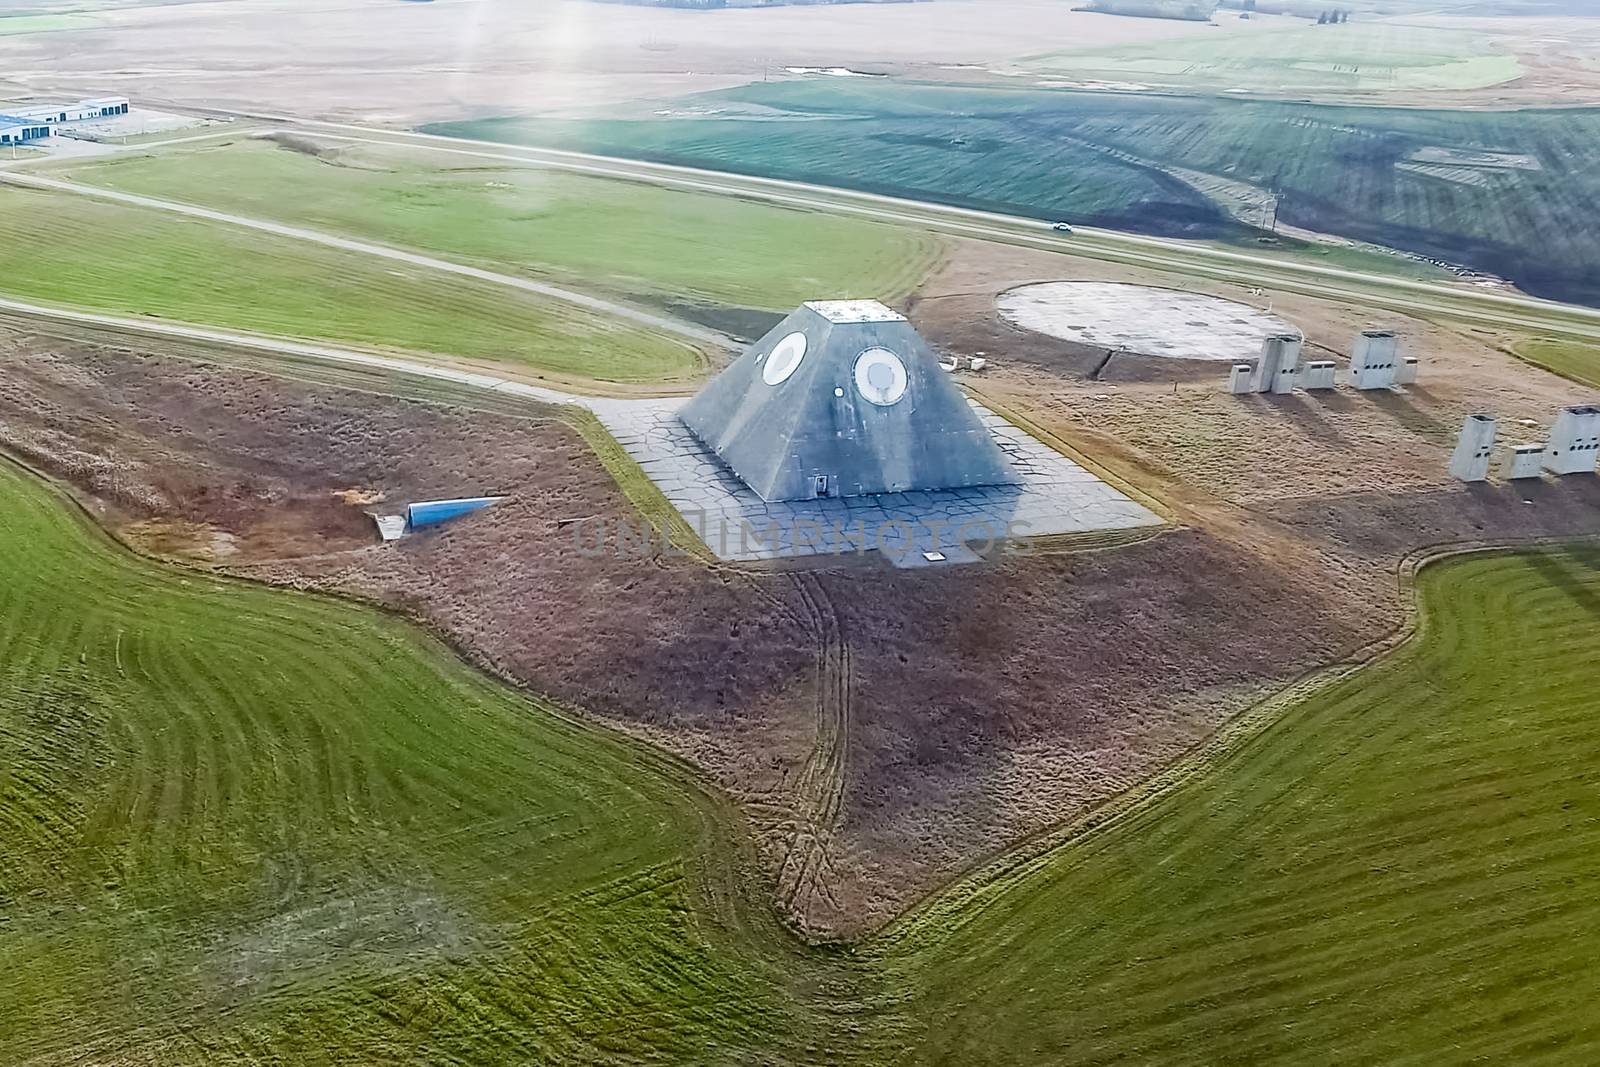 The building of the radio radar in the form of a pyramid on military base. Missile Site Radar Pyramid in Nekoma North Dakota